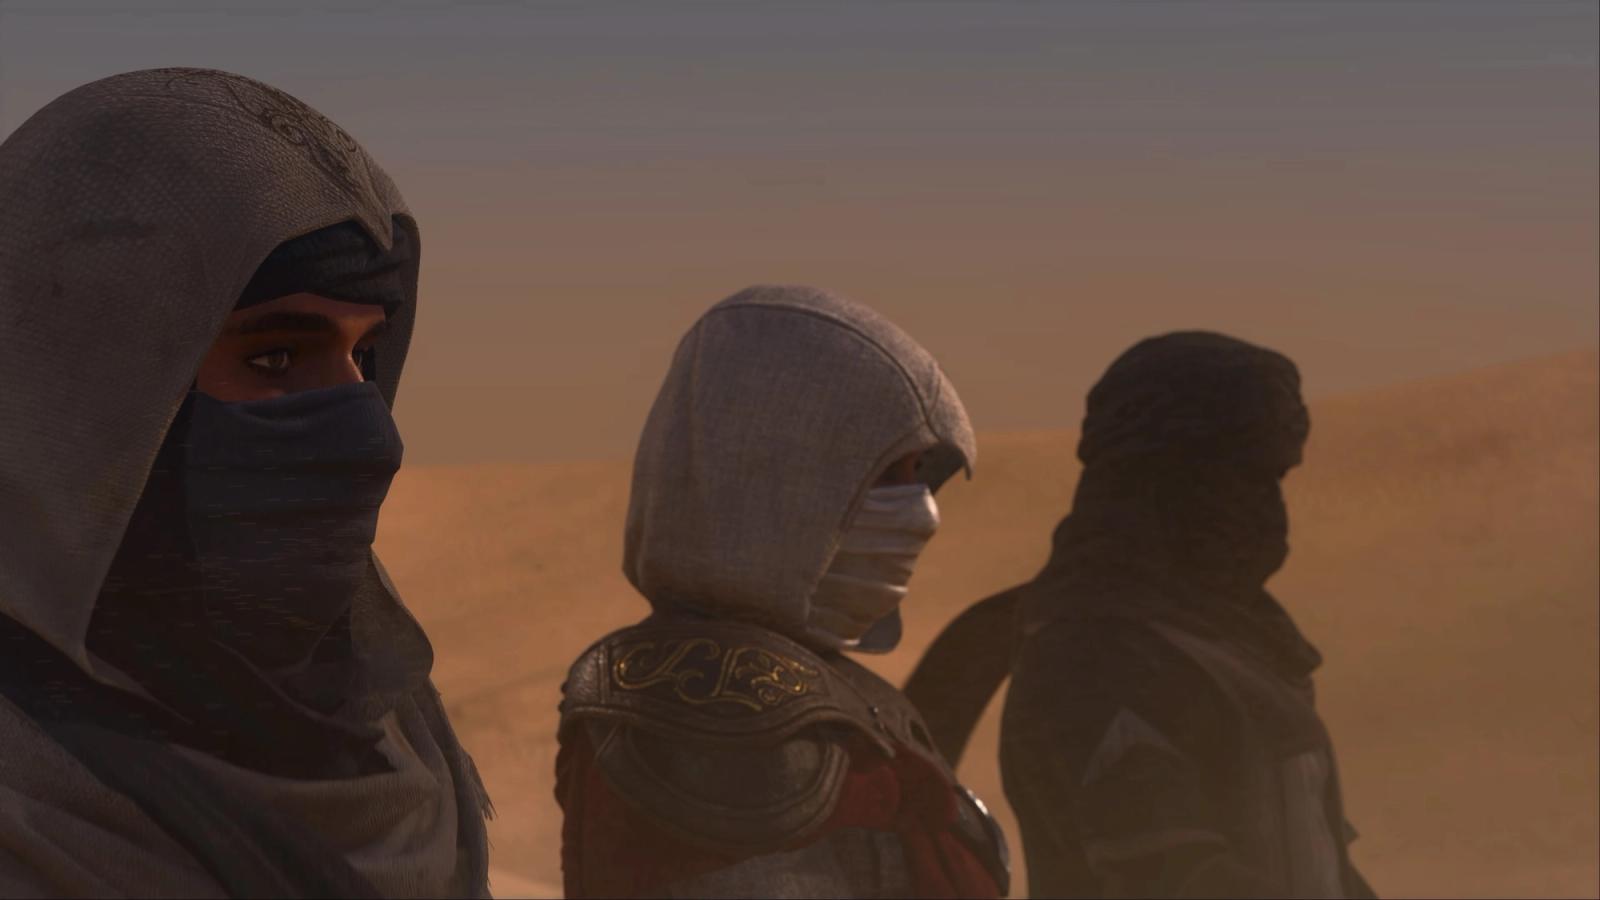 assassin's creed mirage review wearing masks in the desert